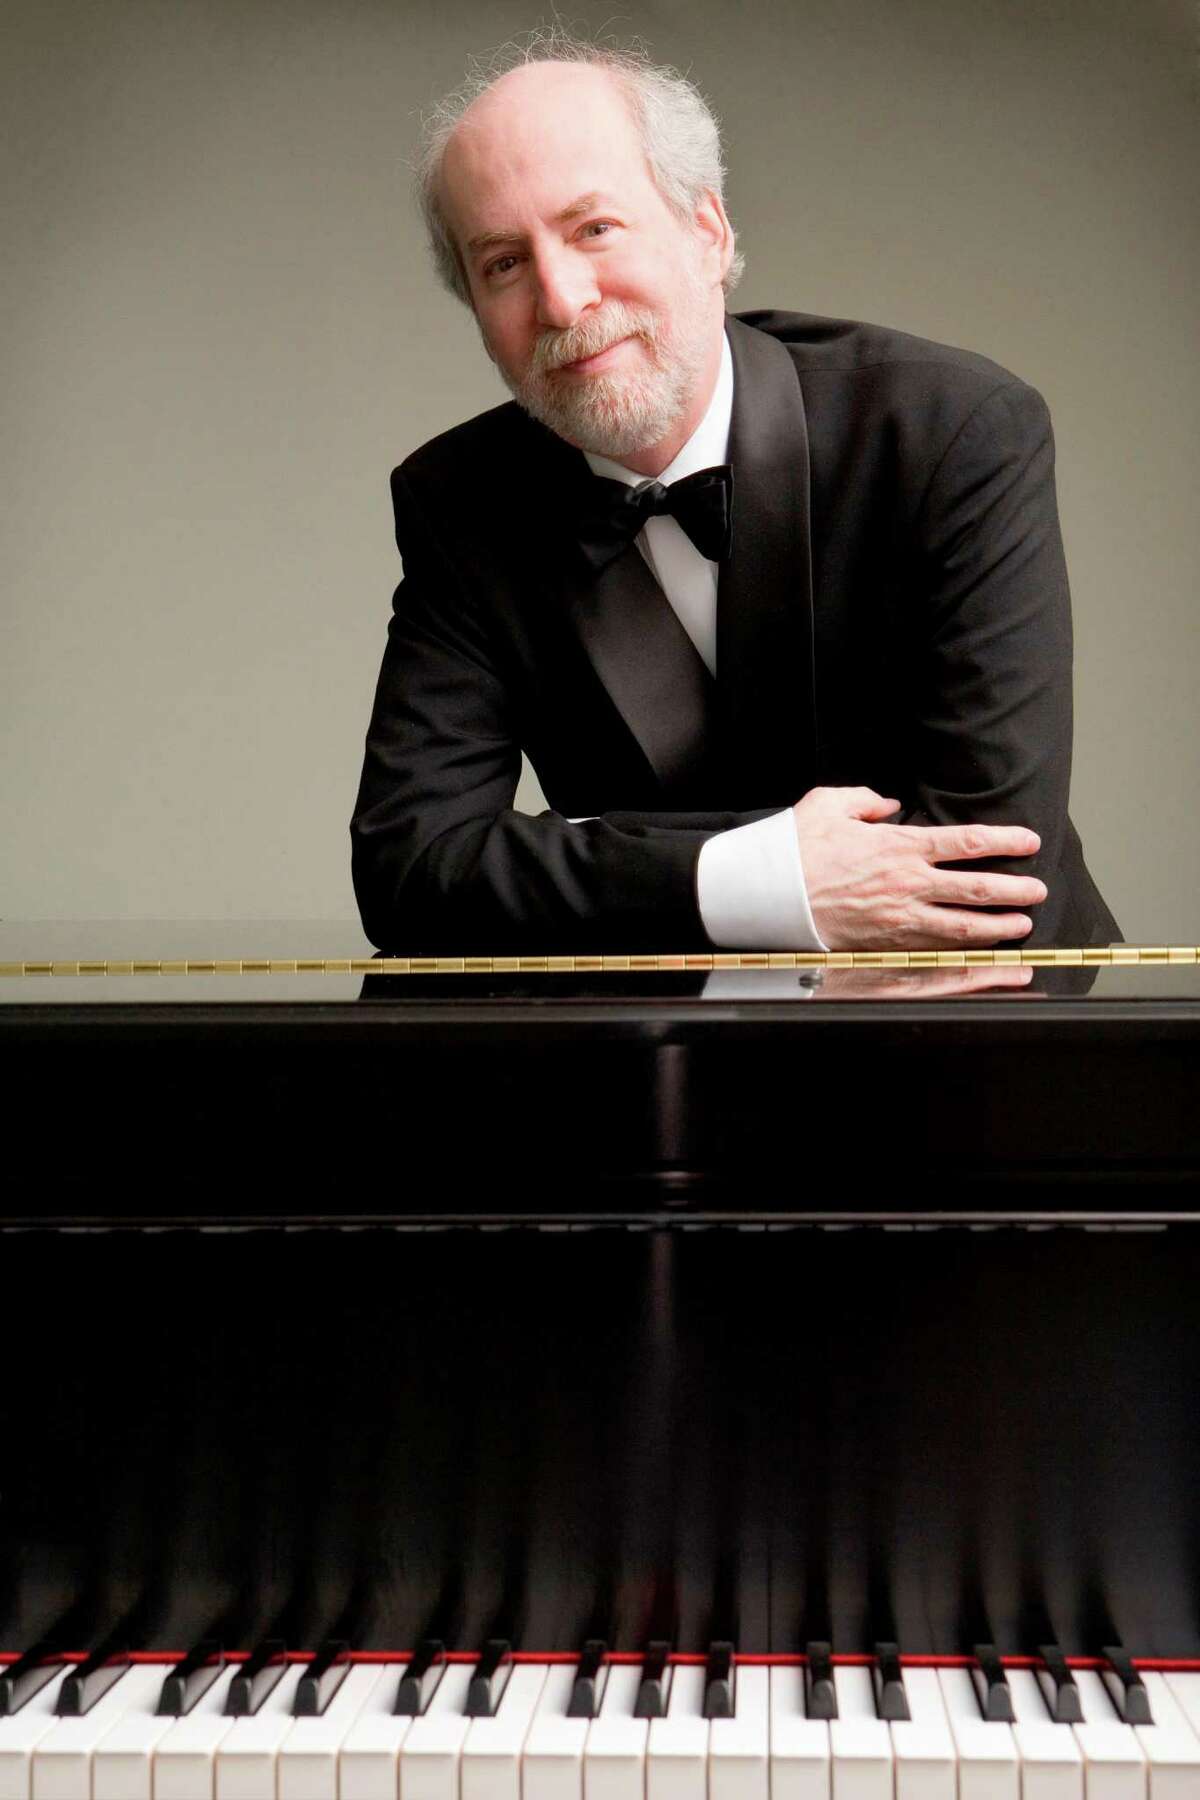 Pianist and composer Haskell Small